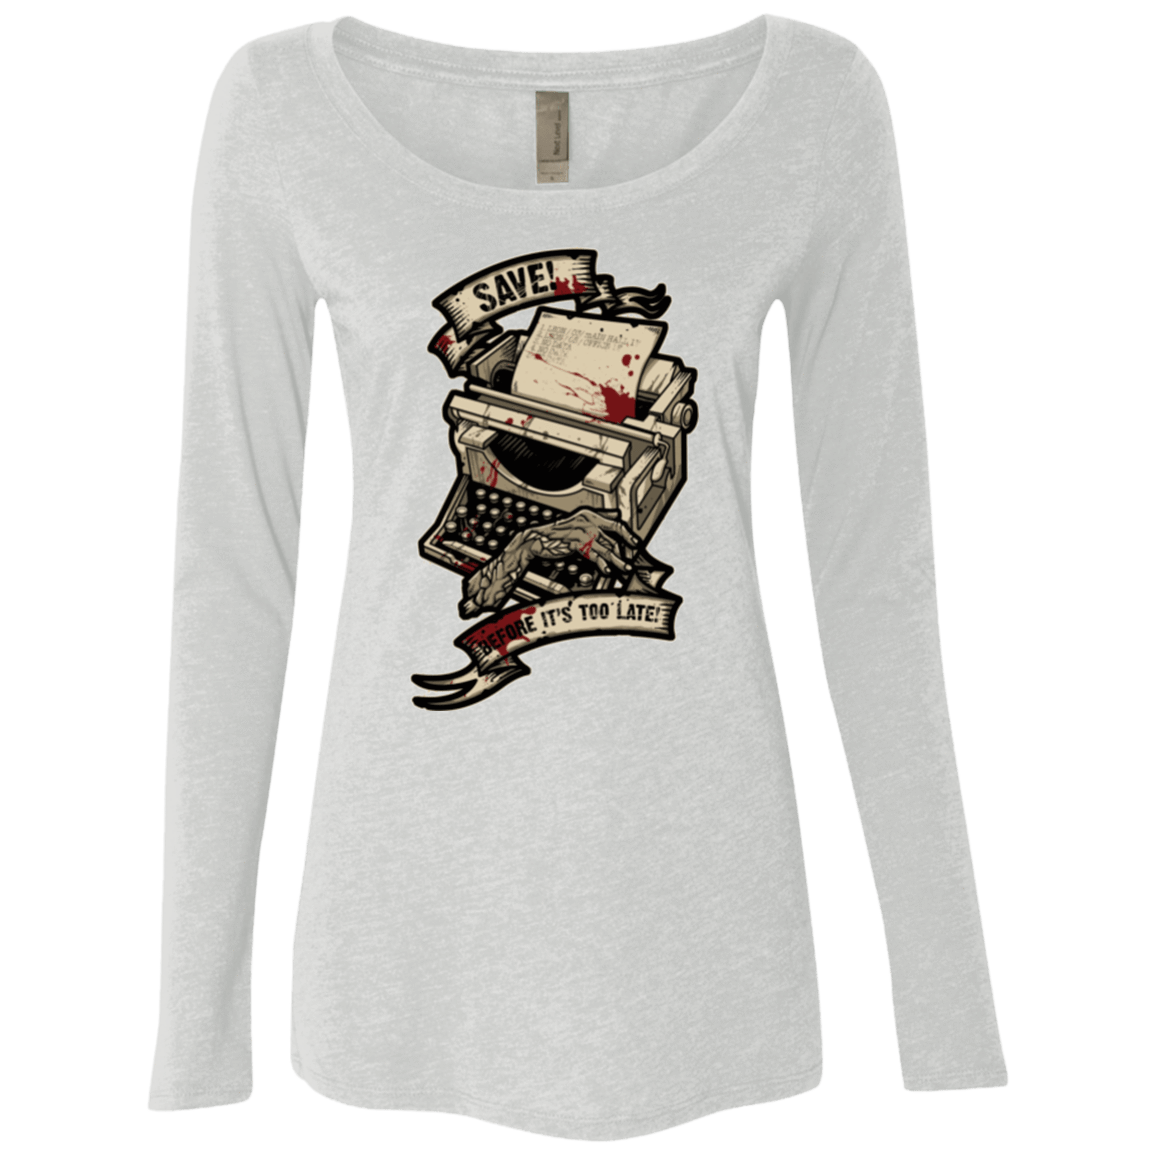 T-Shirts Heather White / Small EVIL SAVE POINT Women's Triblend Long Sleeve Shirt